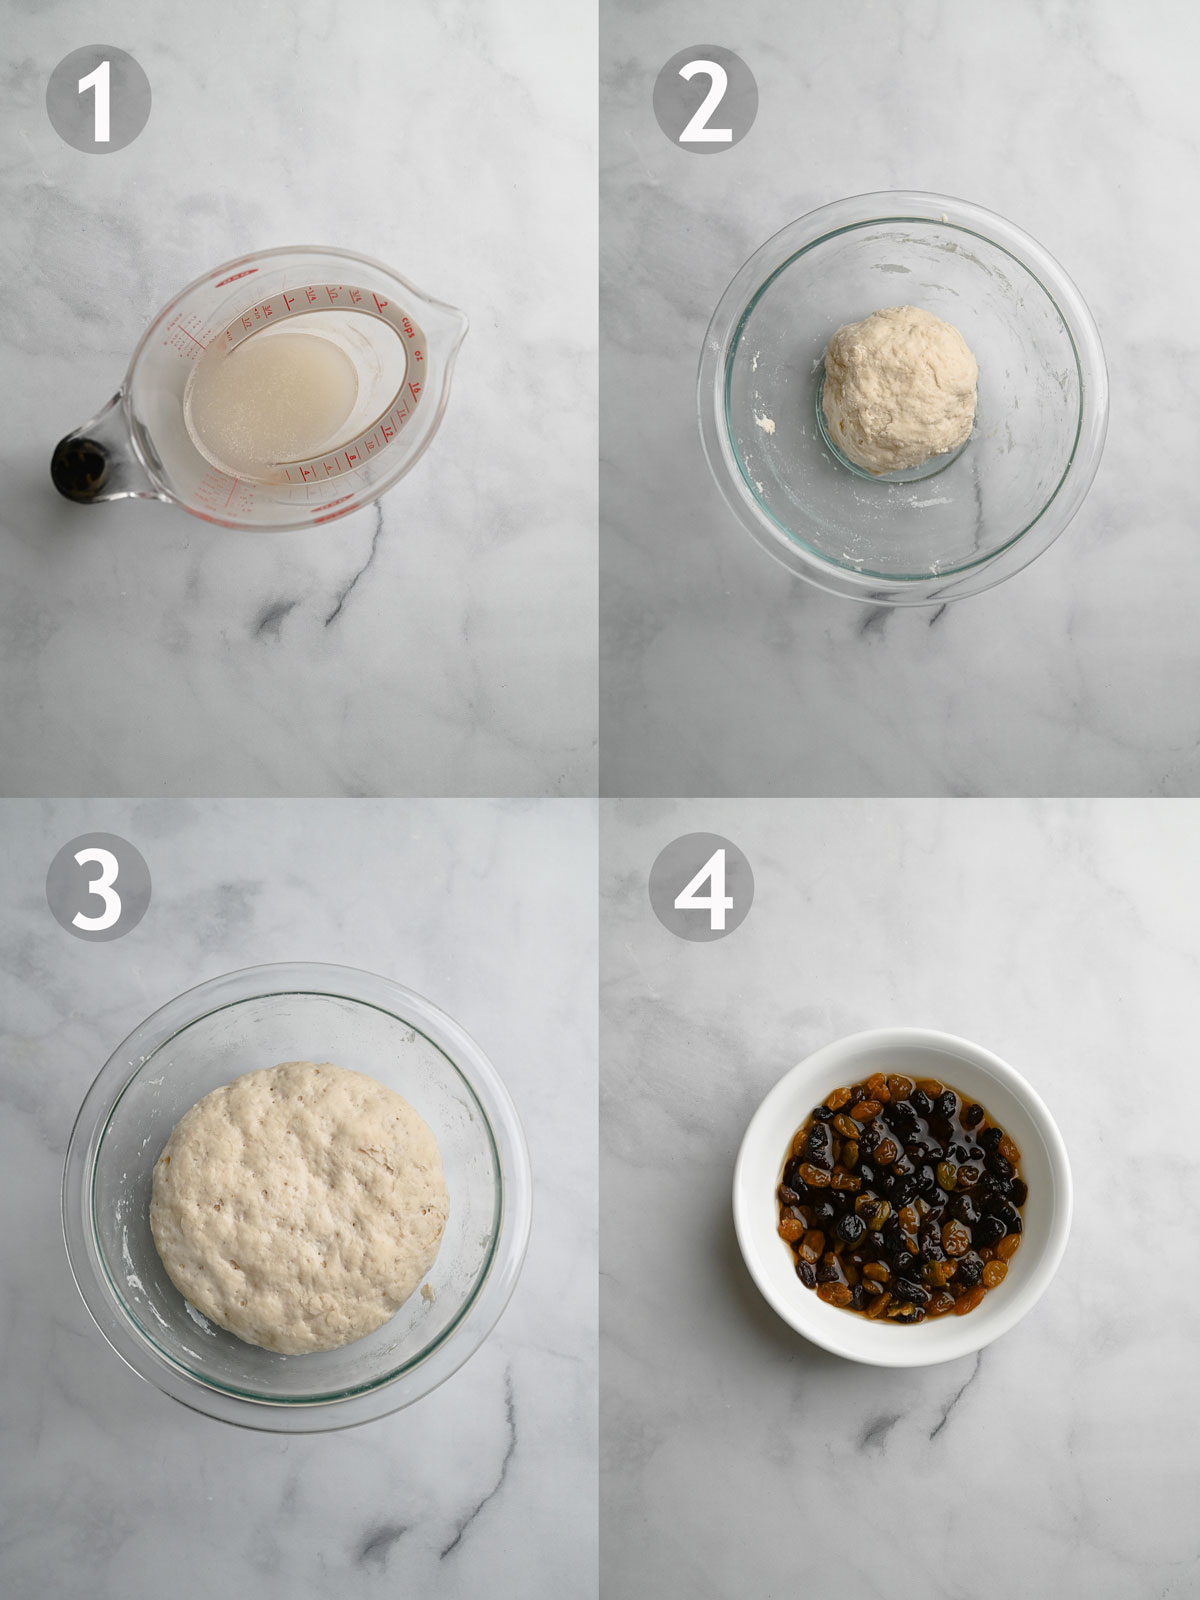 Panettone, steps 1-4, including proofing yeast, making the biga (starter) and soaking the raisins in alcohol.